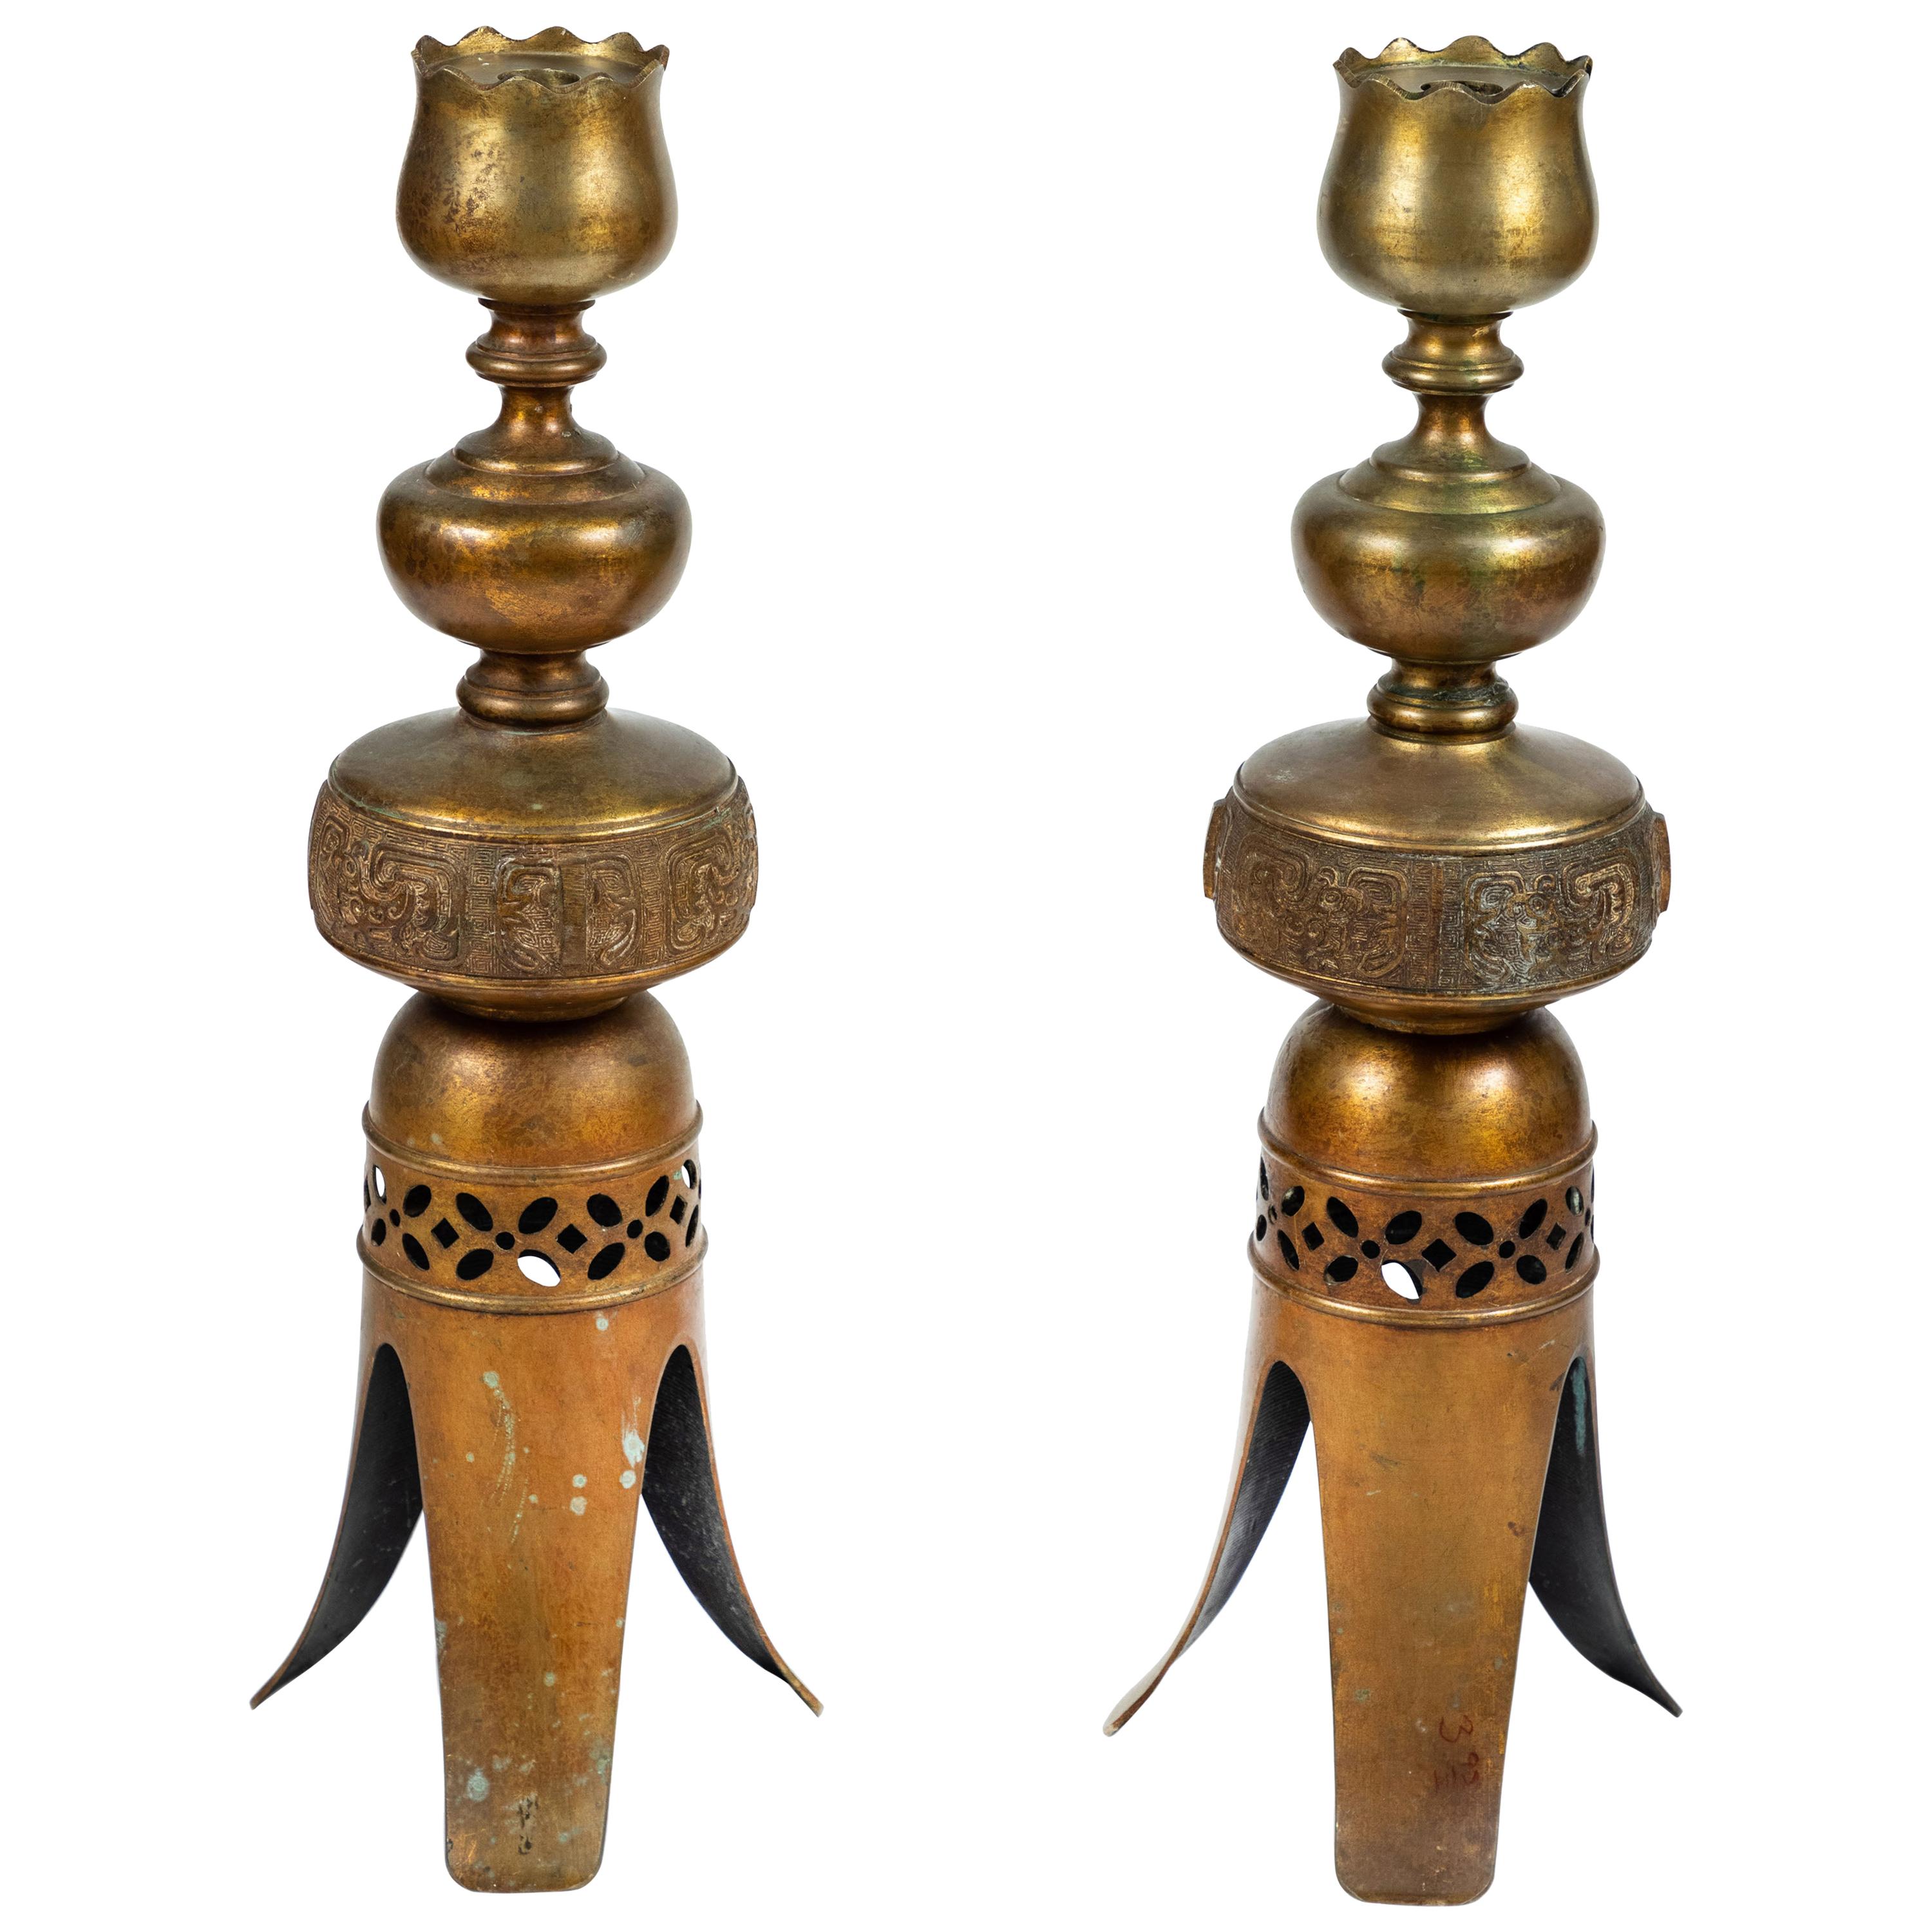 Pair of Vintage Tall Metal Candleholders with 3-Leg Base